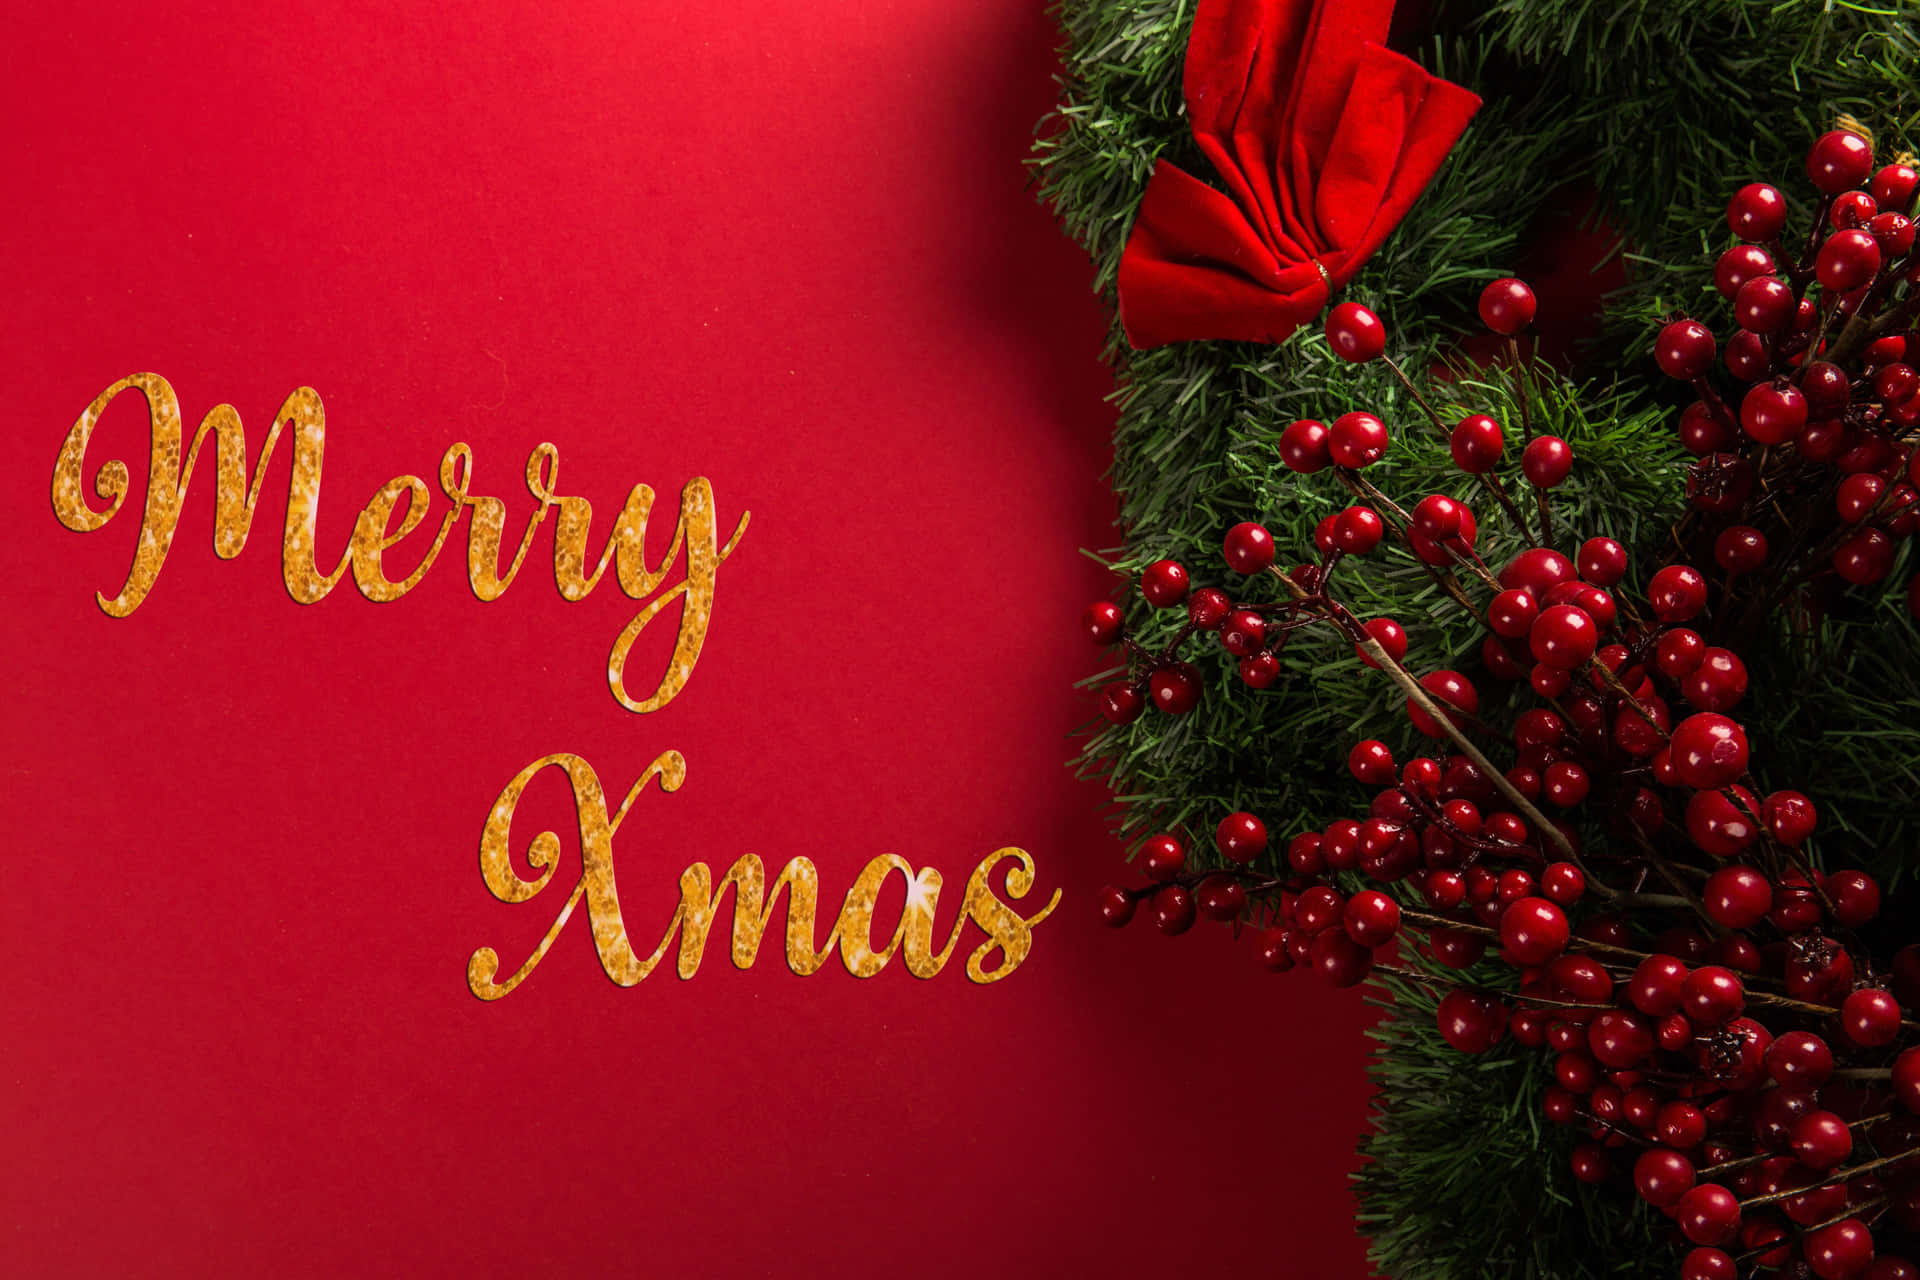 Red Festive Holiday Greeting Merry Xmas Background